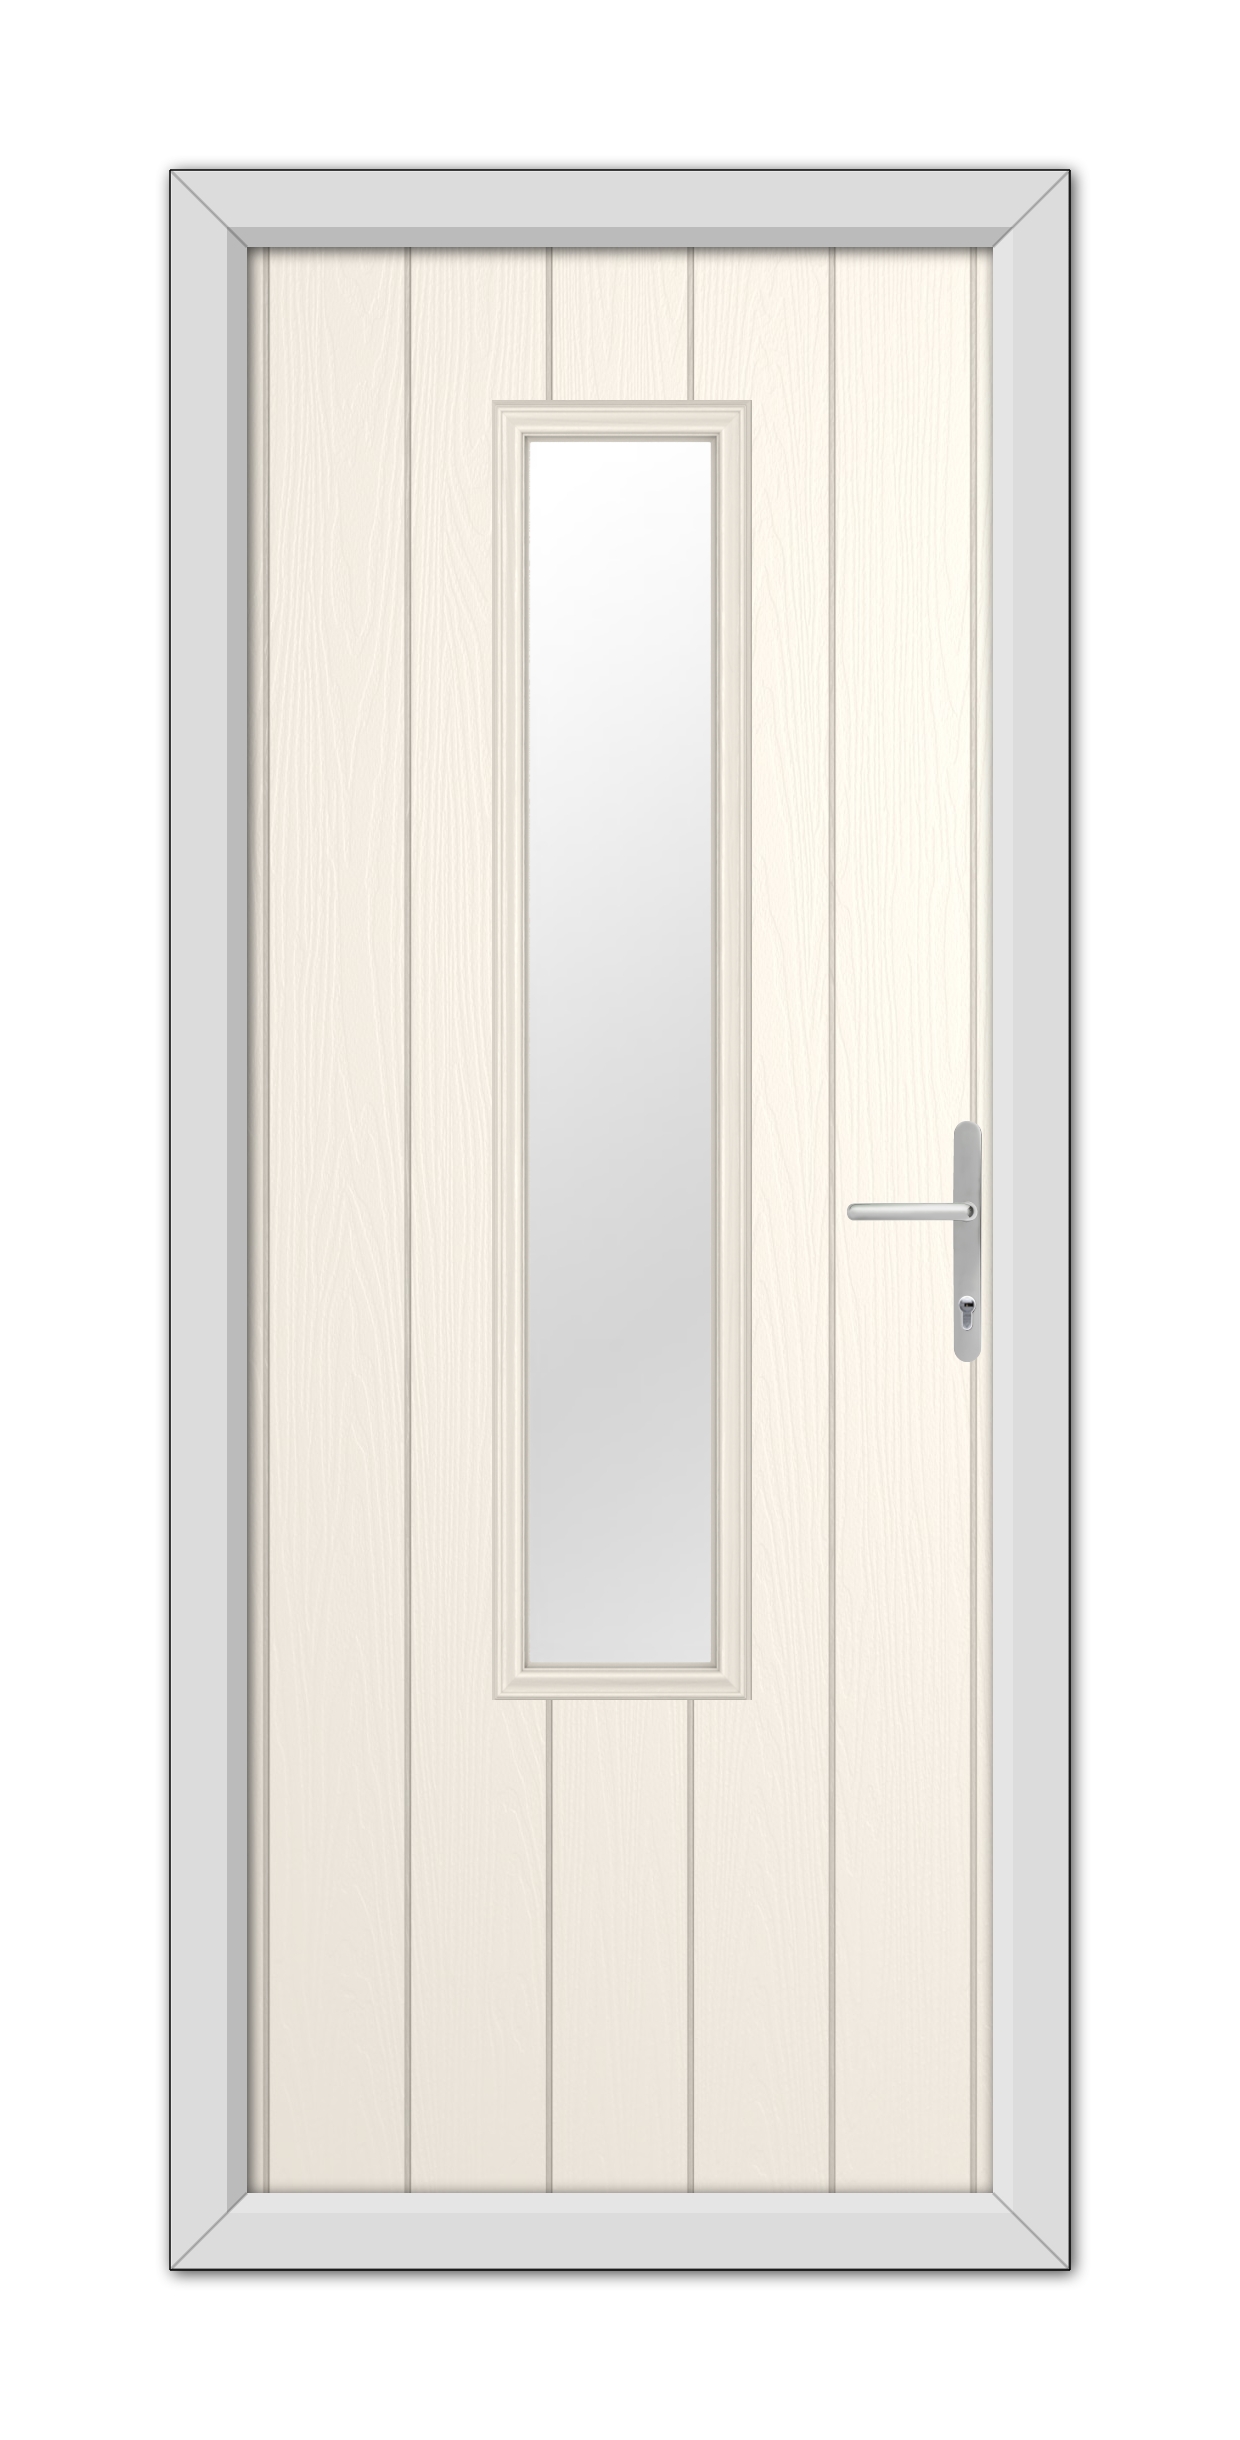 A White Foil Abercorn Composite Door 48mm Timber Core with a vertical, rectangular glass panel in the center, framed by a gray doorframe and equipped with a metal handle on the right side.